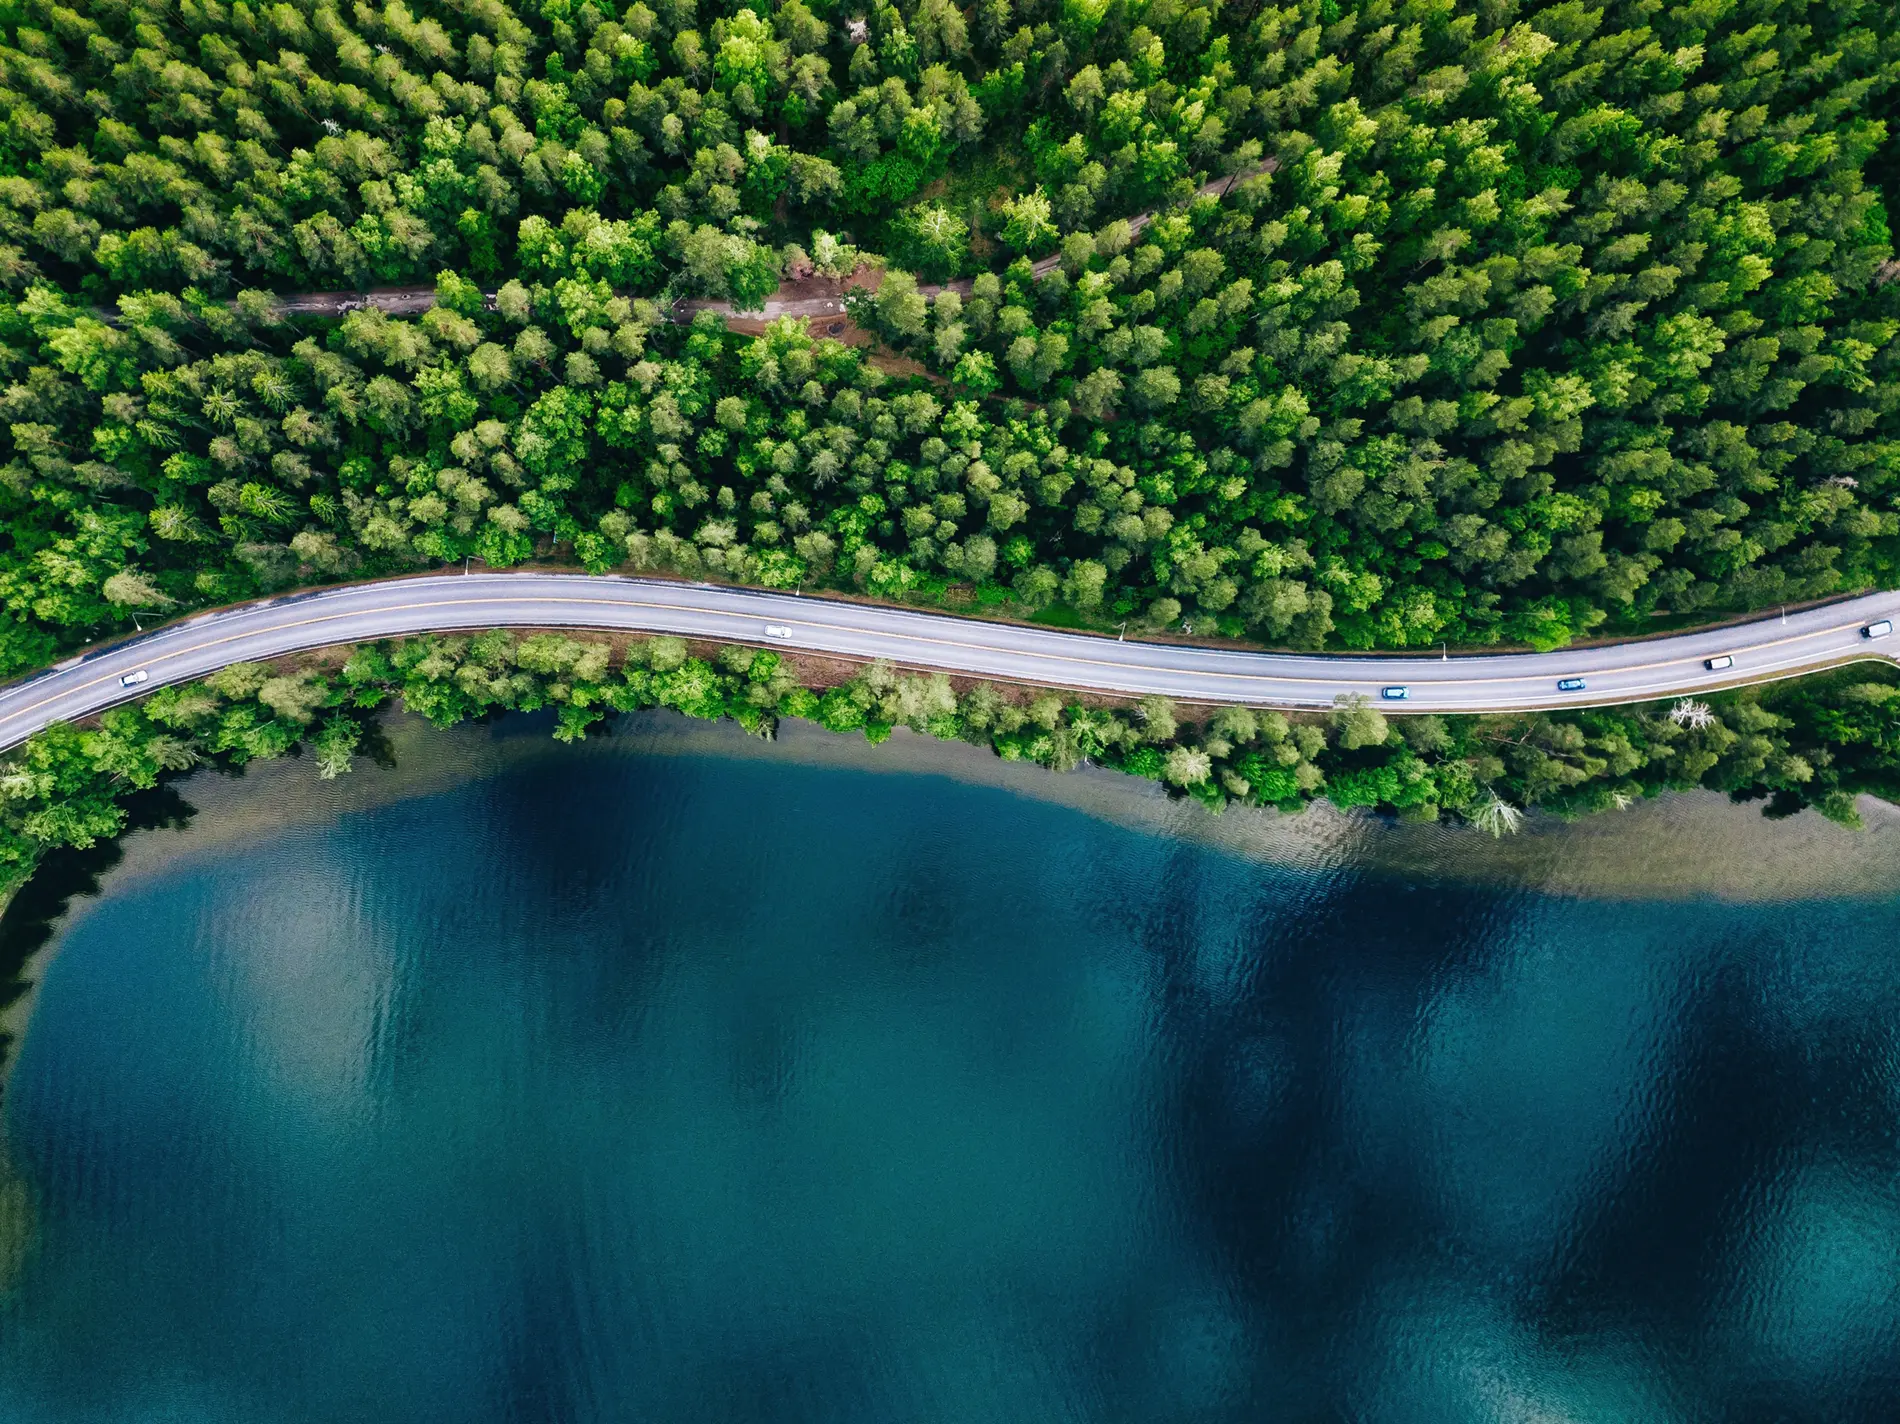 A road between a green forest and blue lake symbolizing our companies moving forward together.